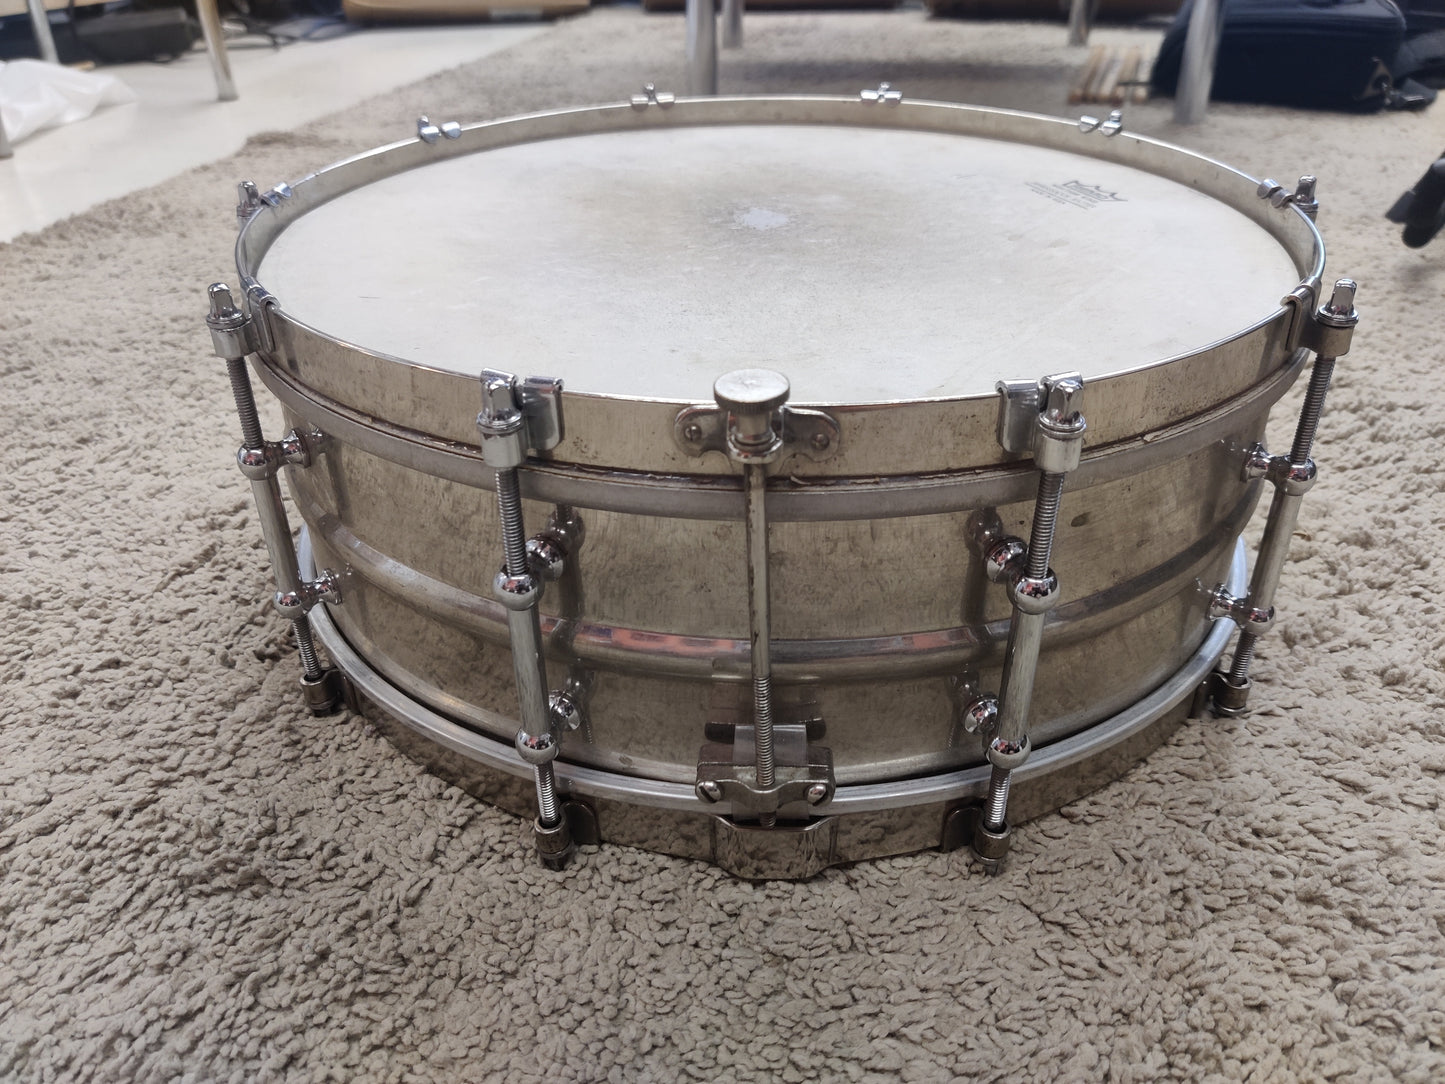 Gretsch early 1900s snare drum - Aron Soitin